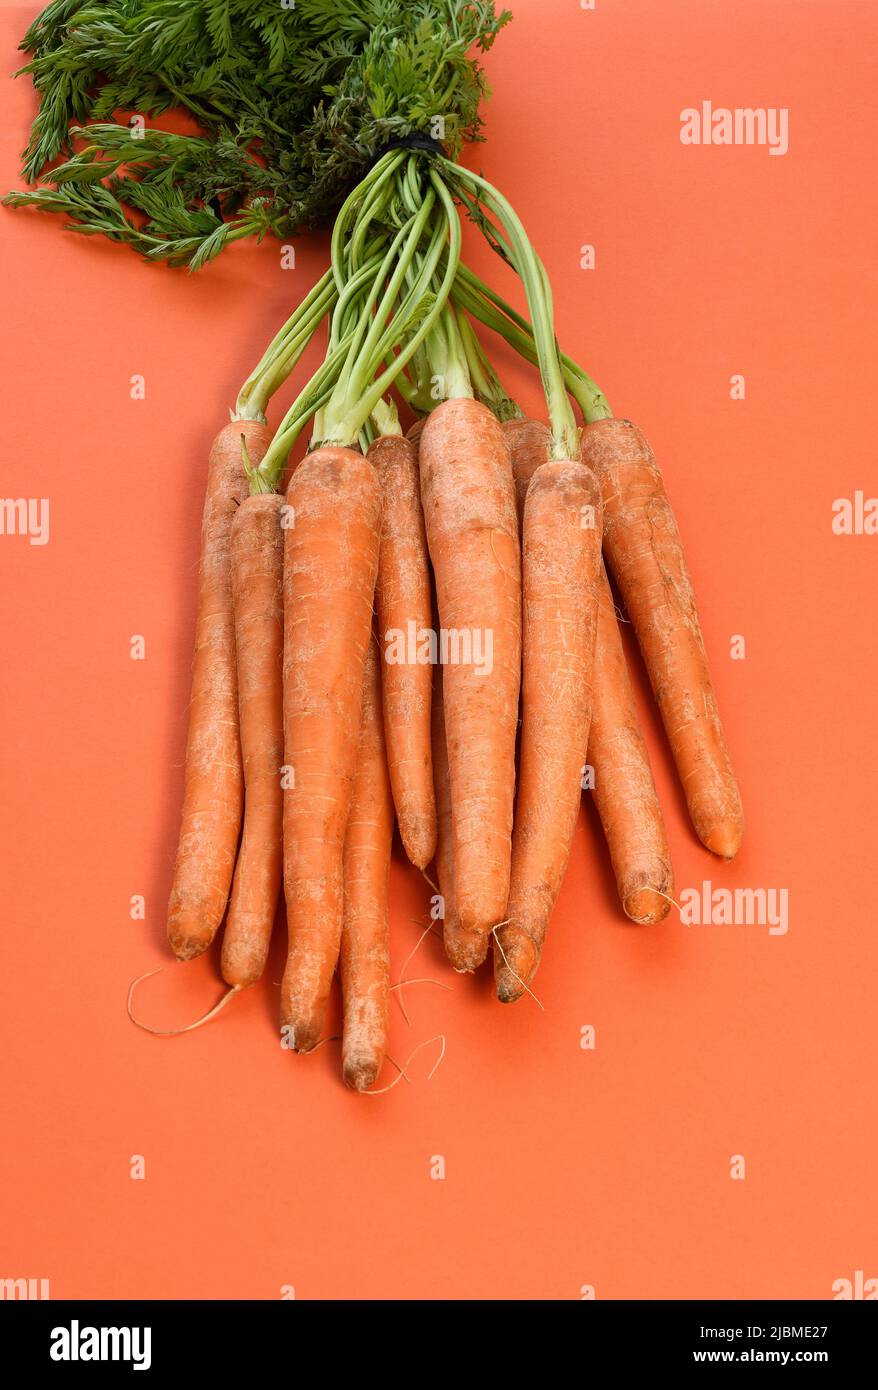 A bunch of fresh carrots with green stalks Stock Photo